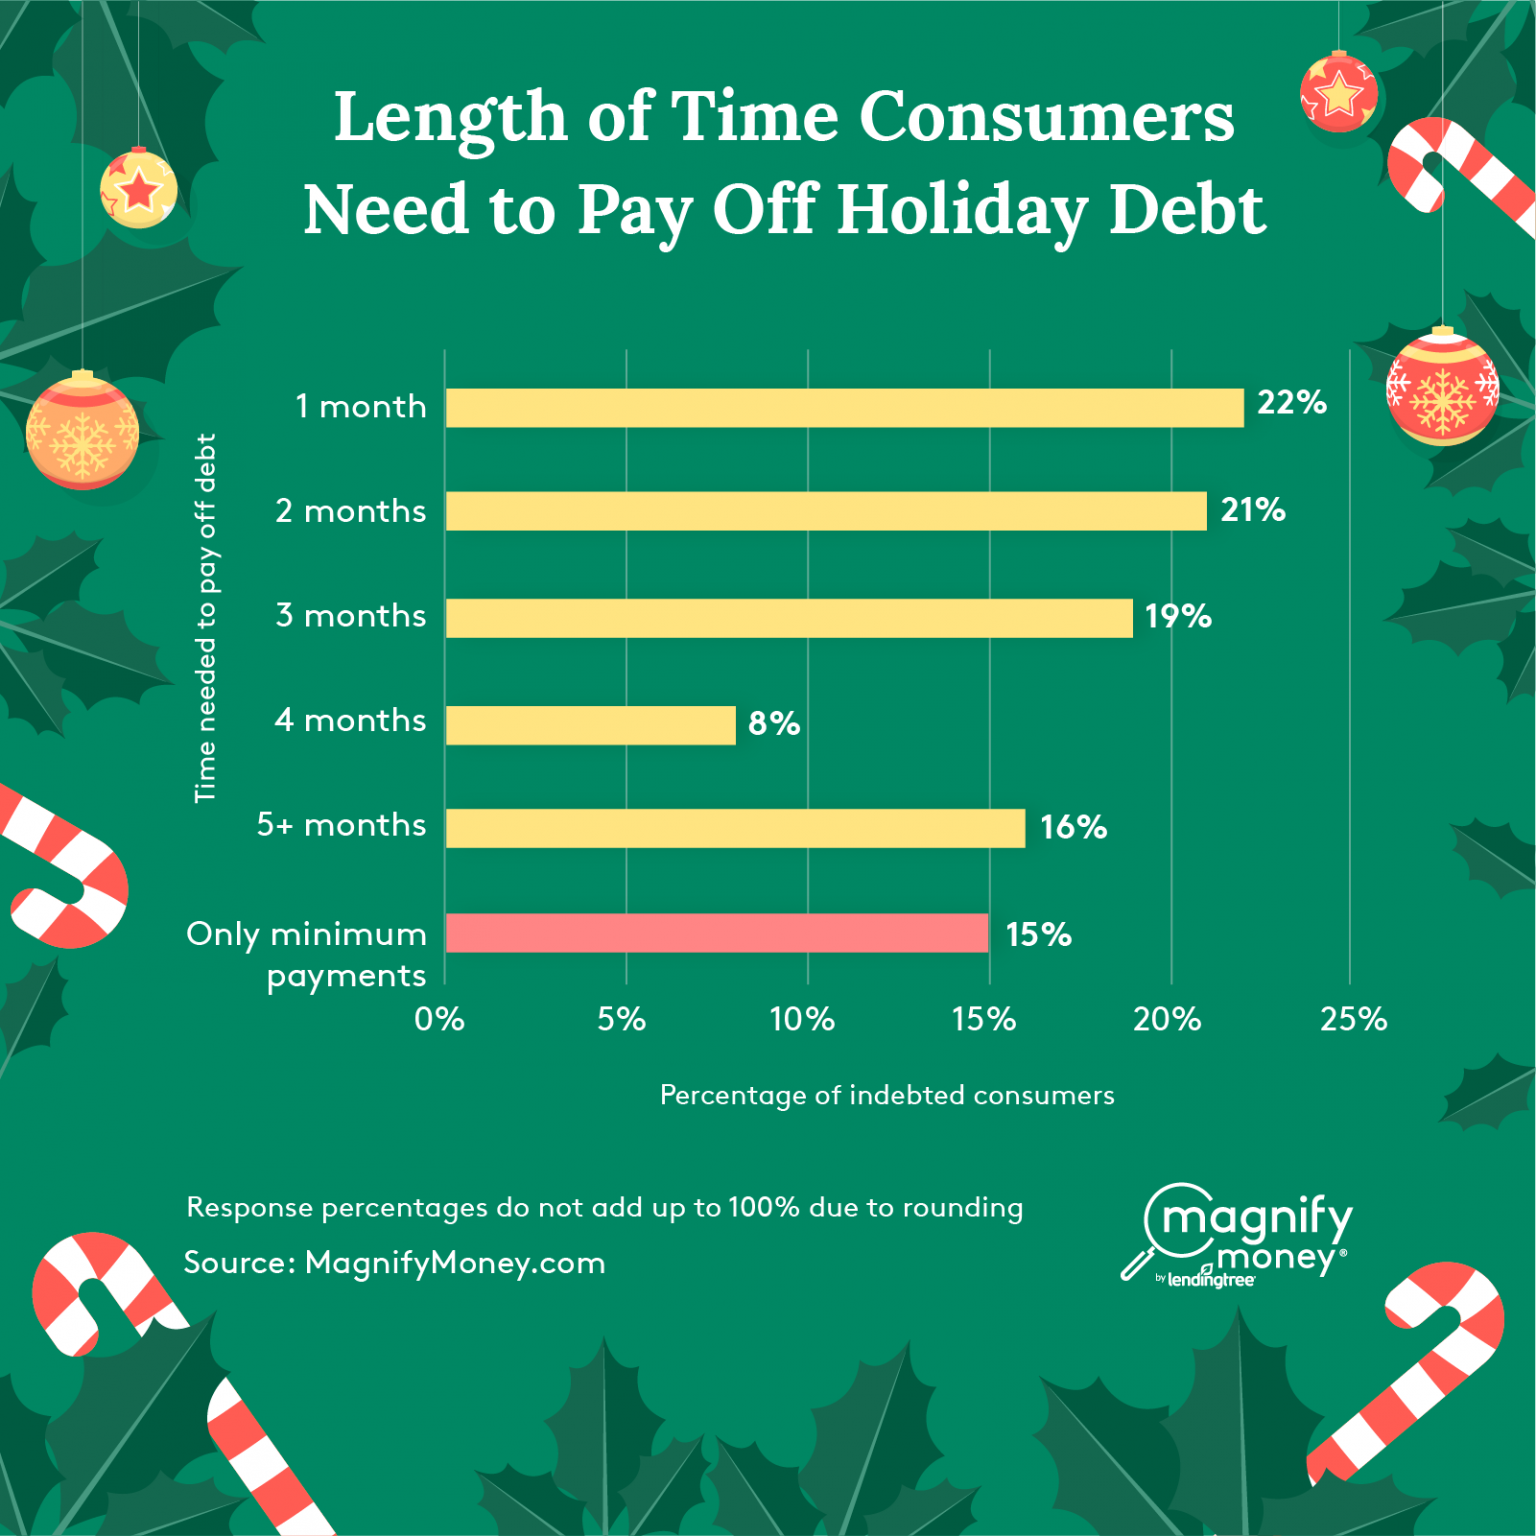 78% of consumers need longer than 1 month to pay off 2019 holiday debt